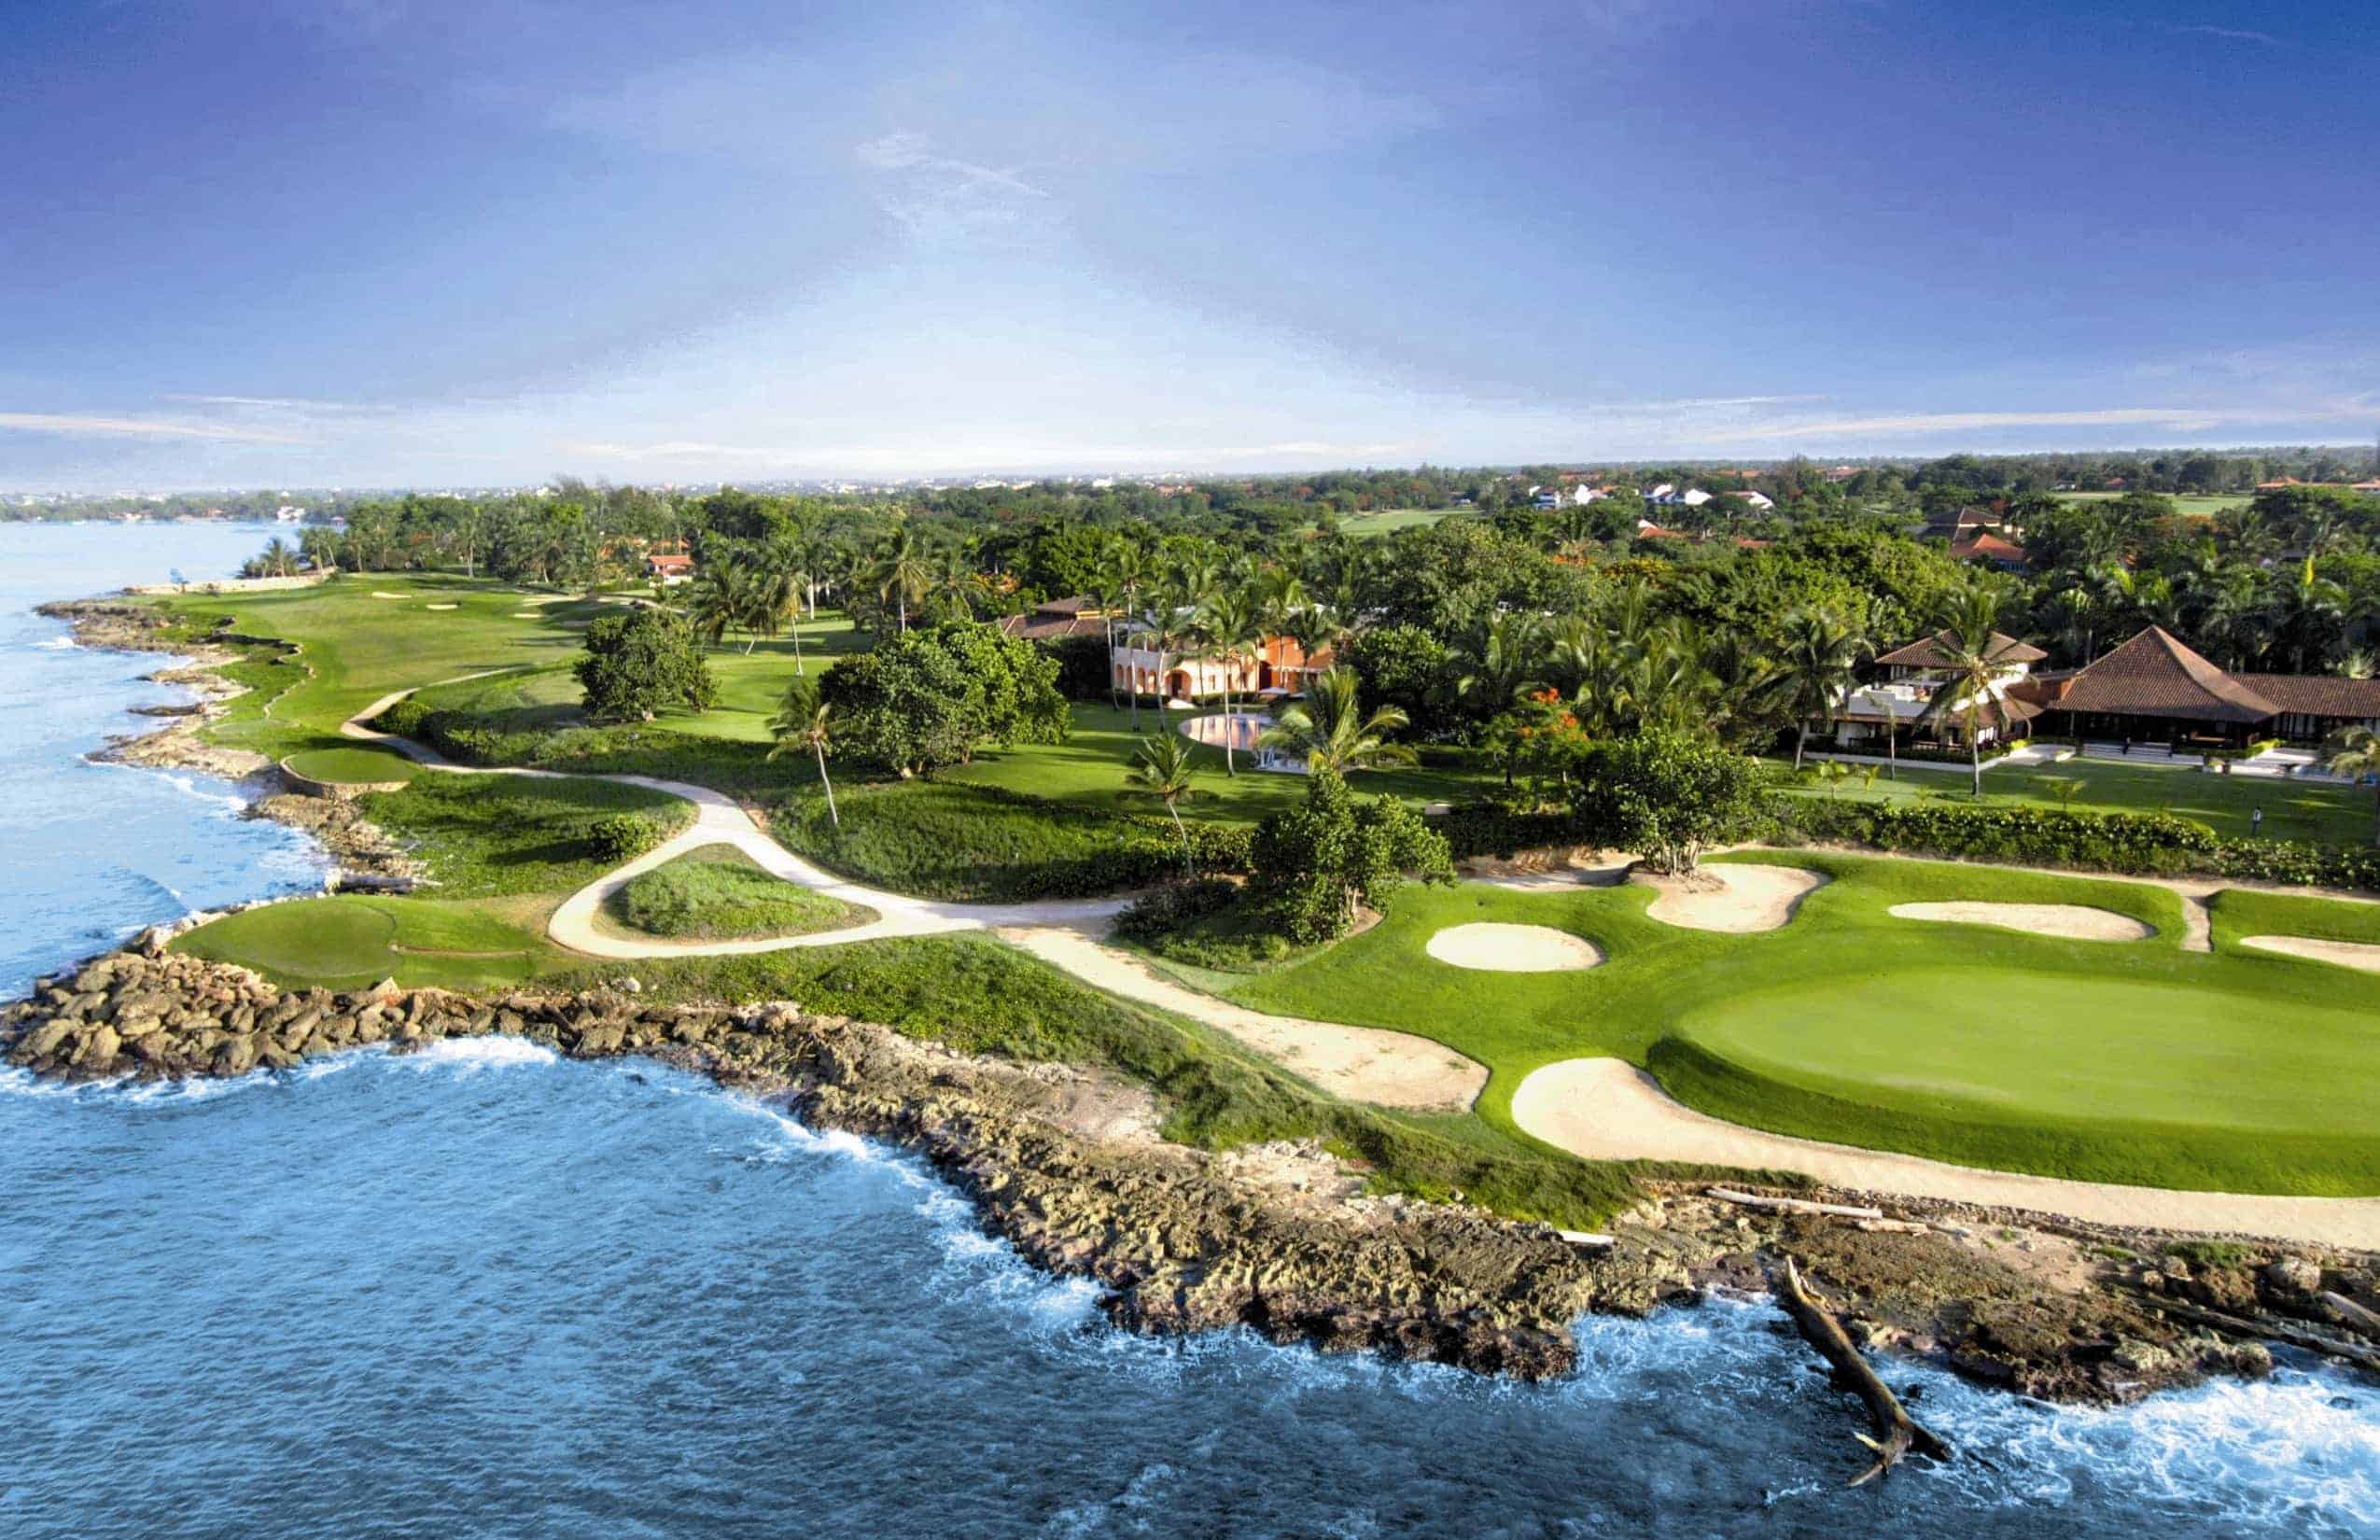 Teeth of the Dog® Golf Course and Dominican Republic Oceanfront View at Casa de Campo Resort & Villas